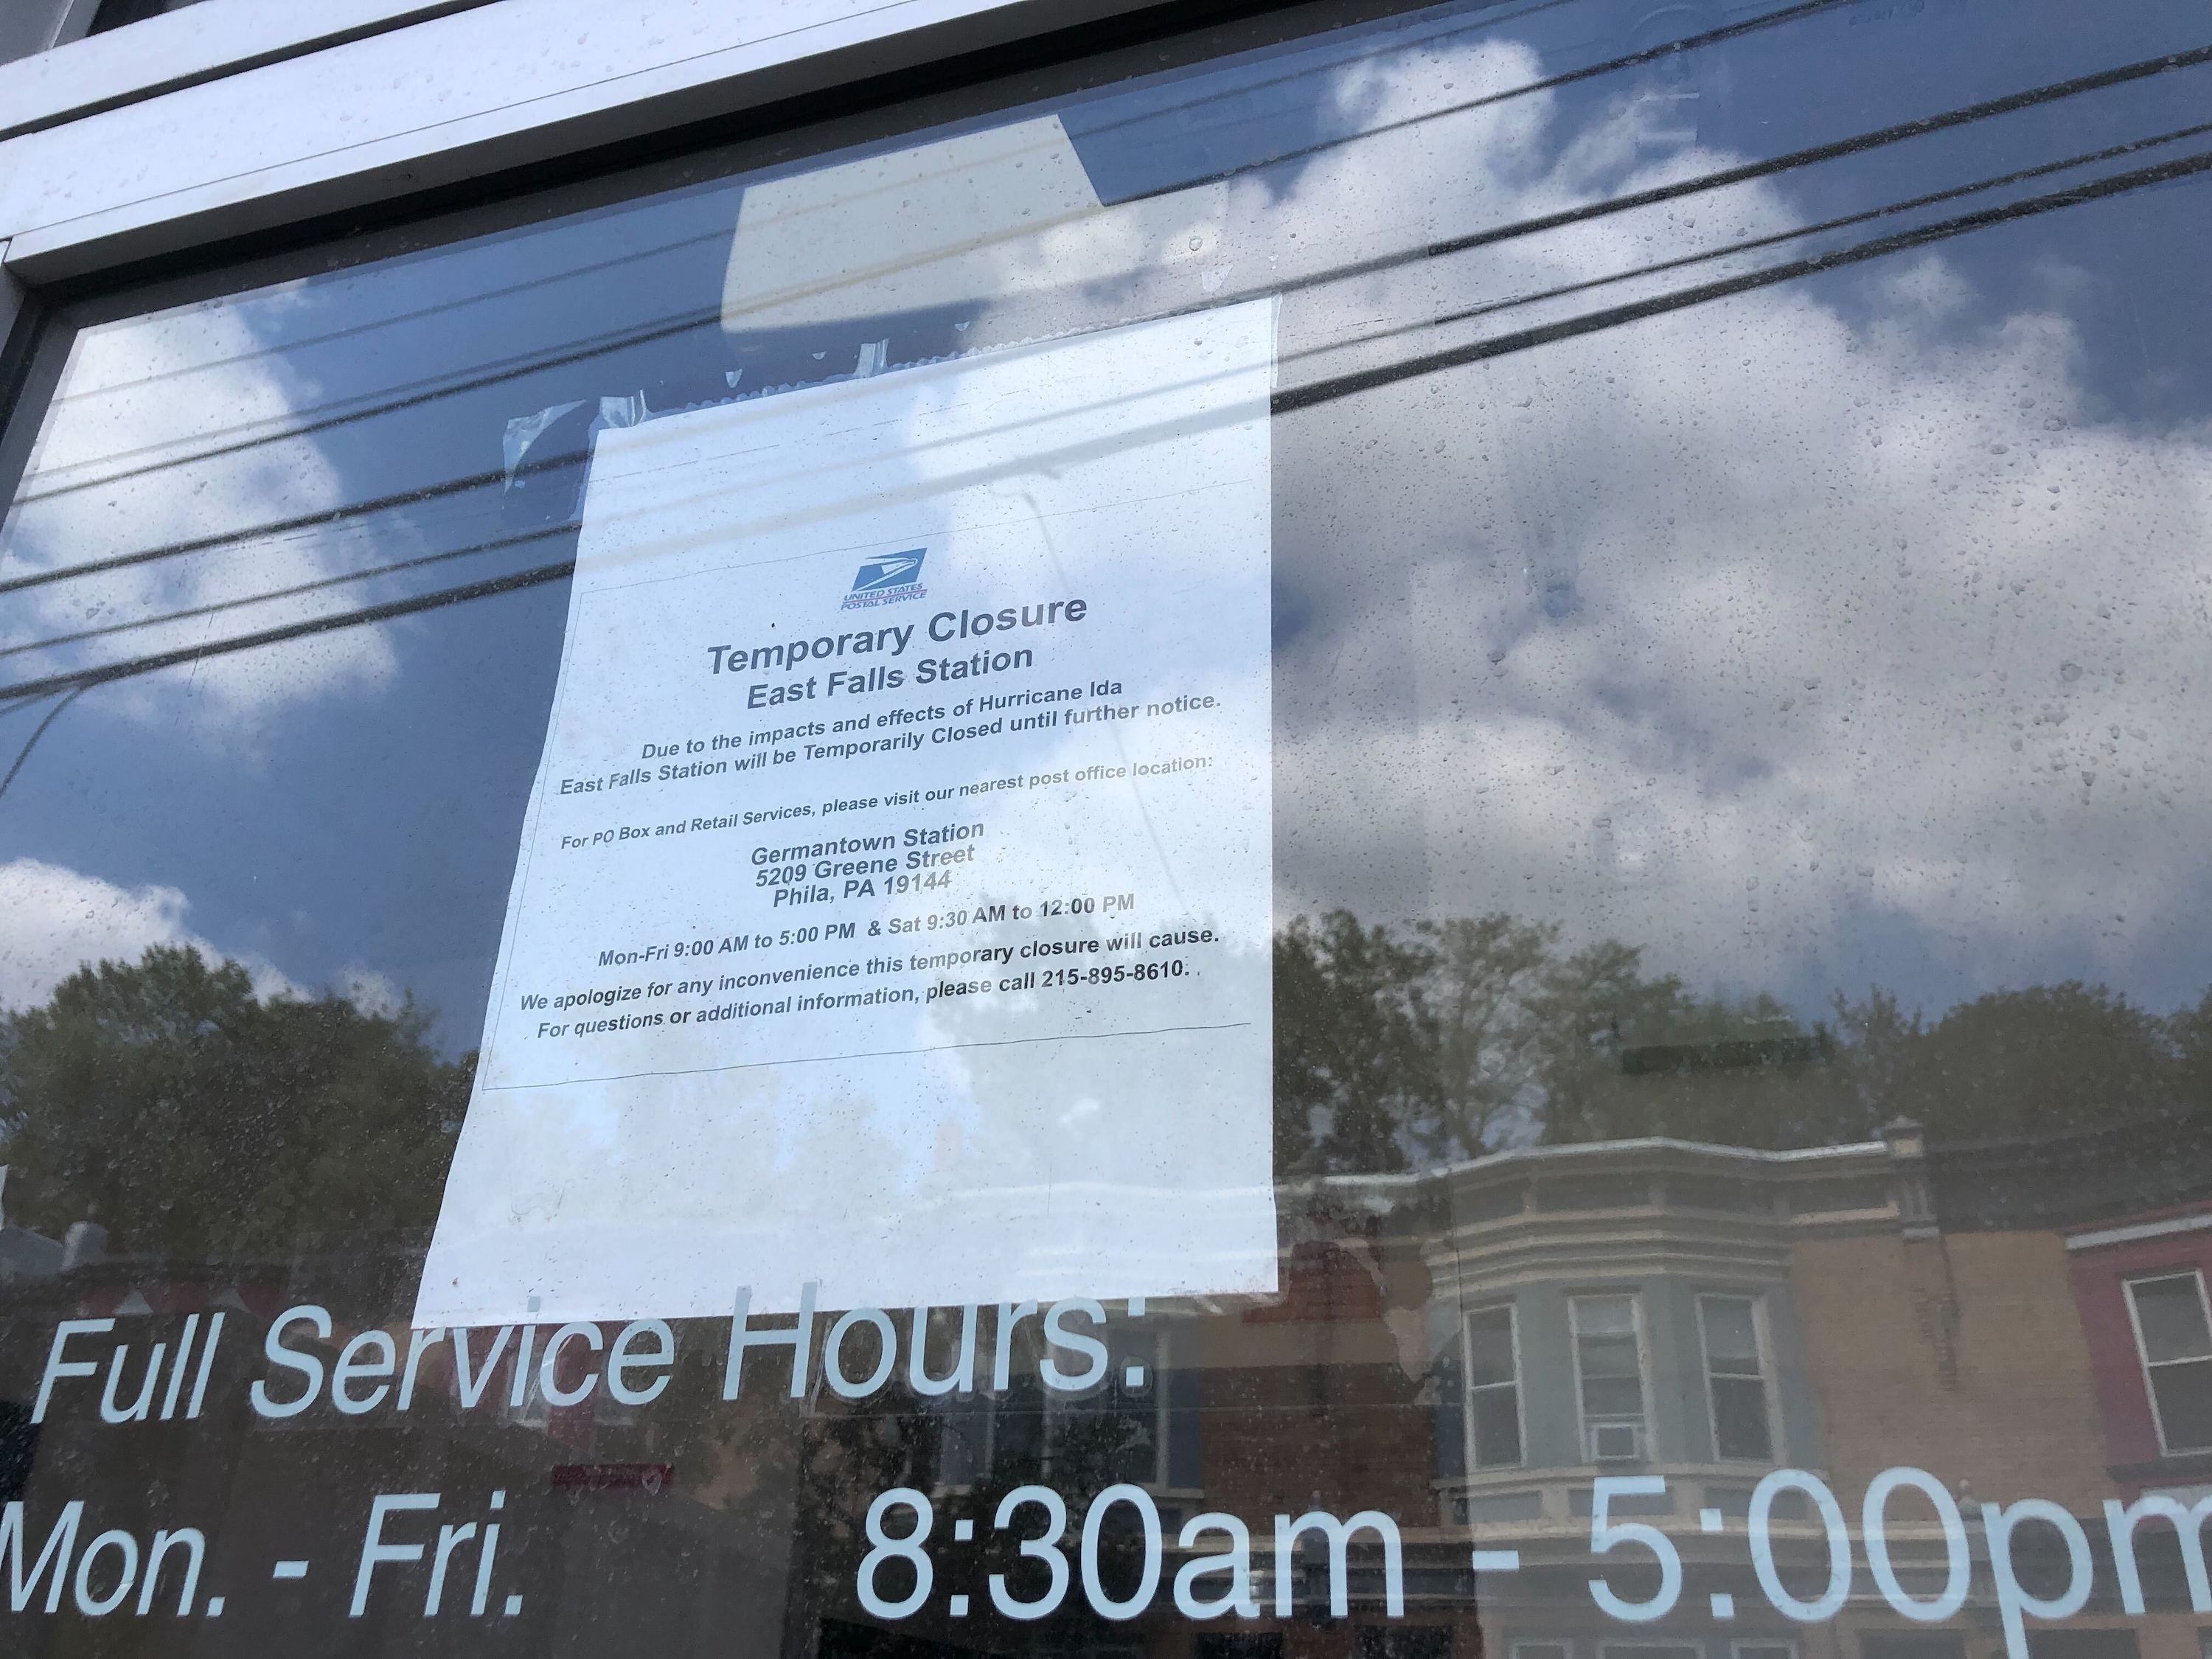 East Falls Post Office still closed after Ida flooding - WHYY